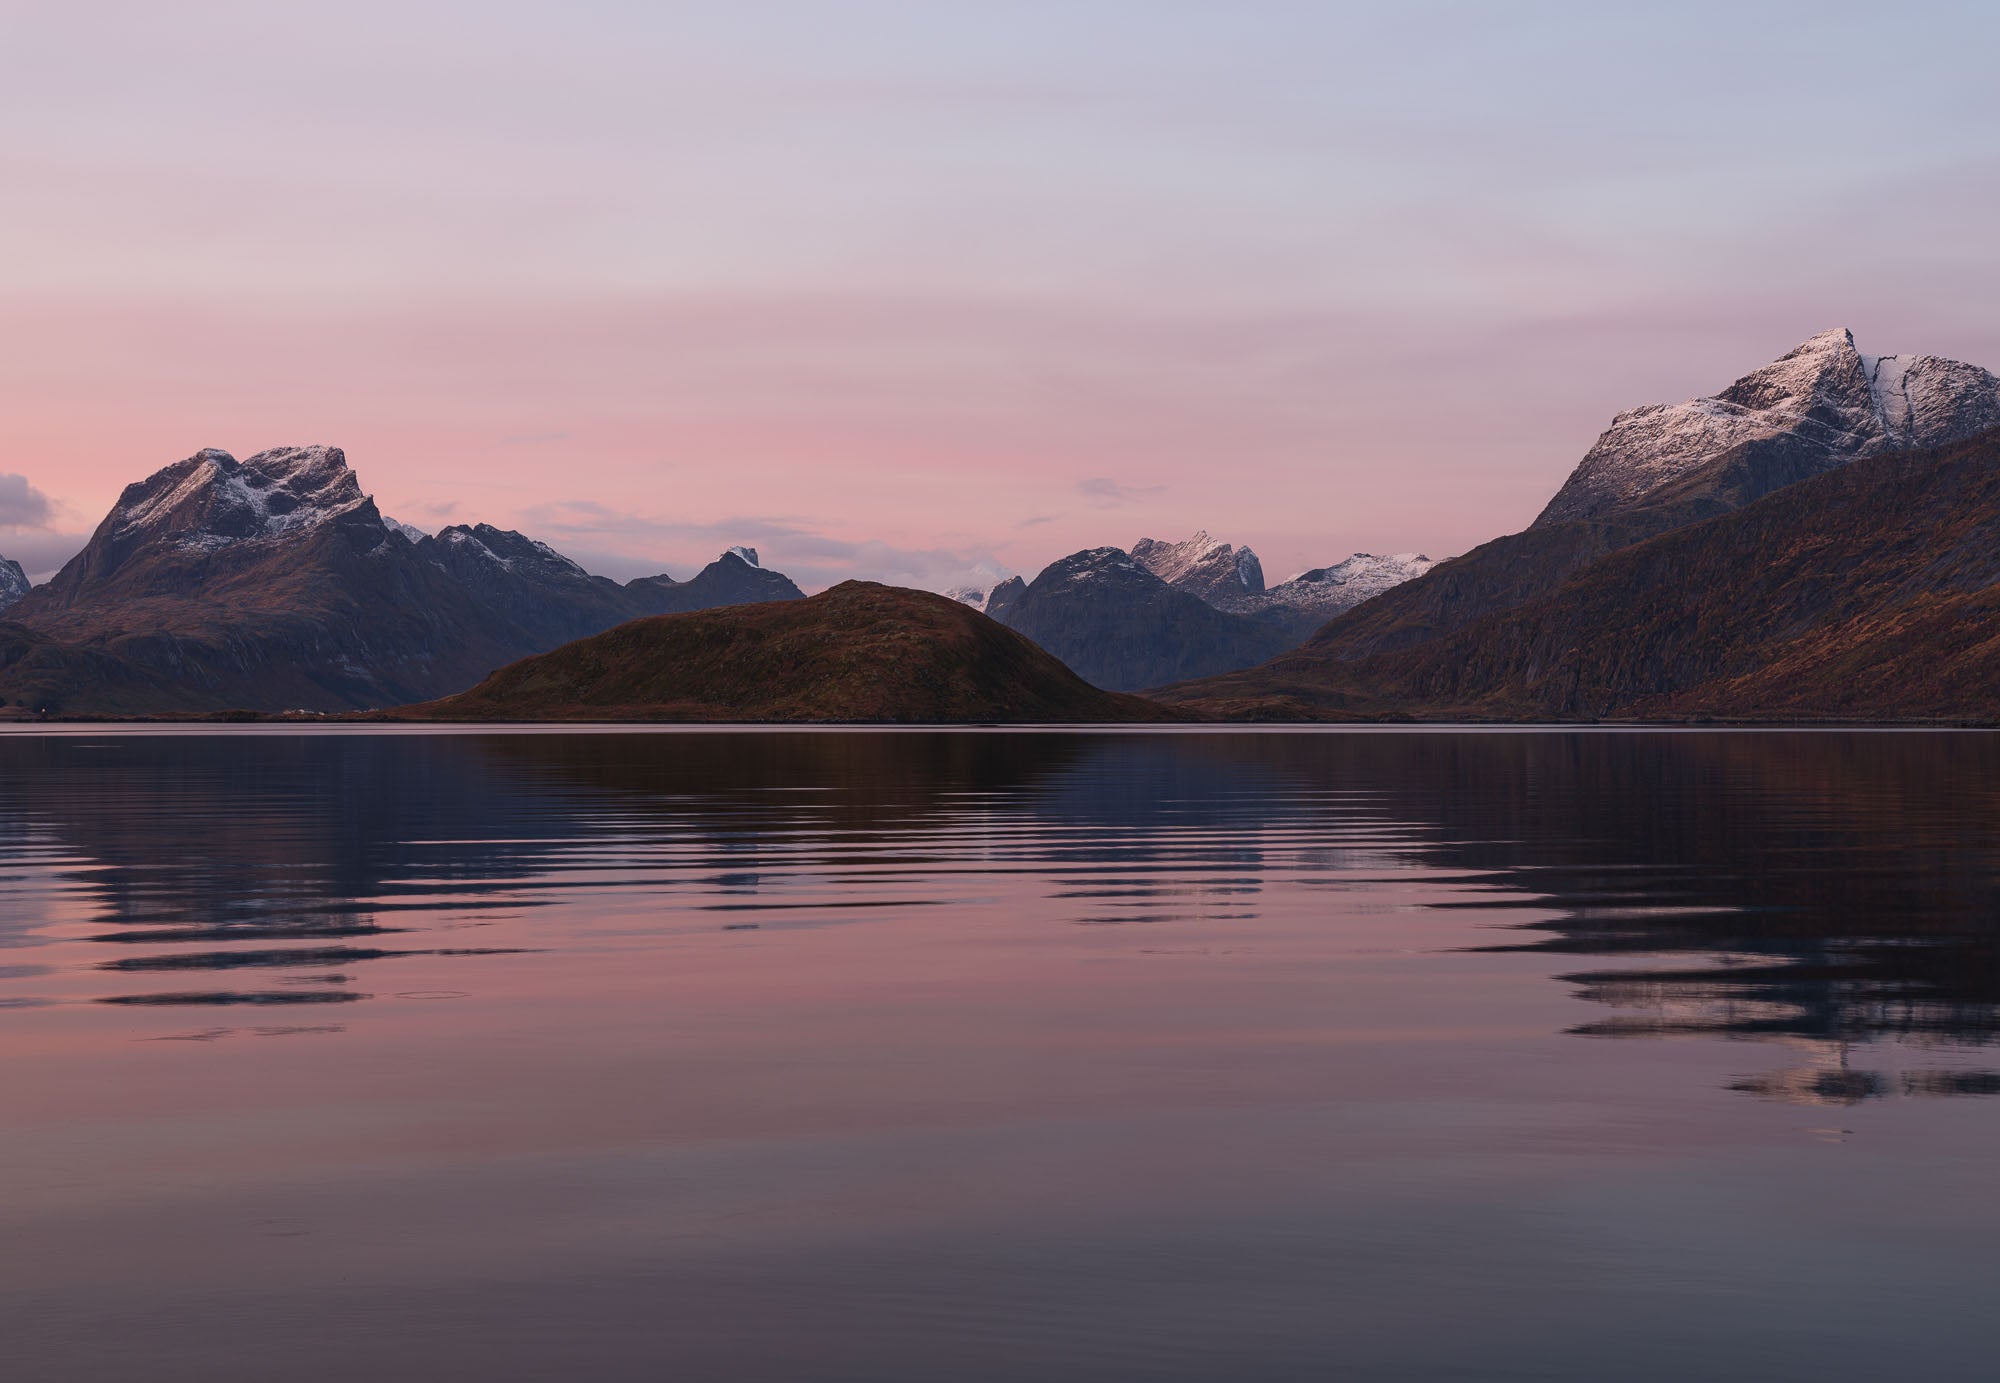 Sunrise at Fredvang in Lofoten, with snow-capped mountains reflecting in calm waters under a pastel-hued sky.